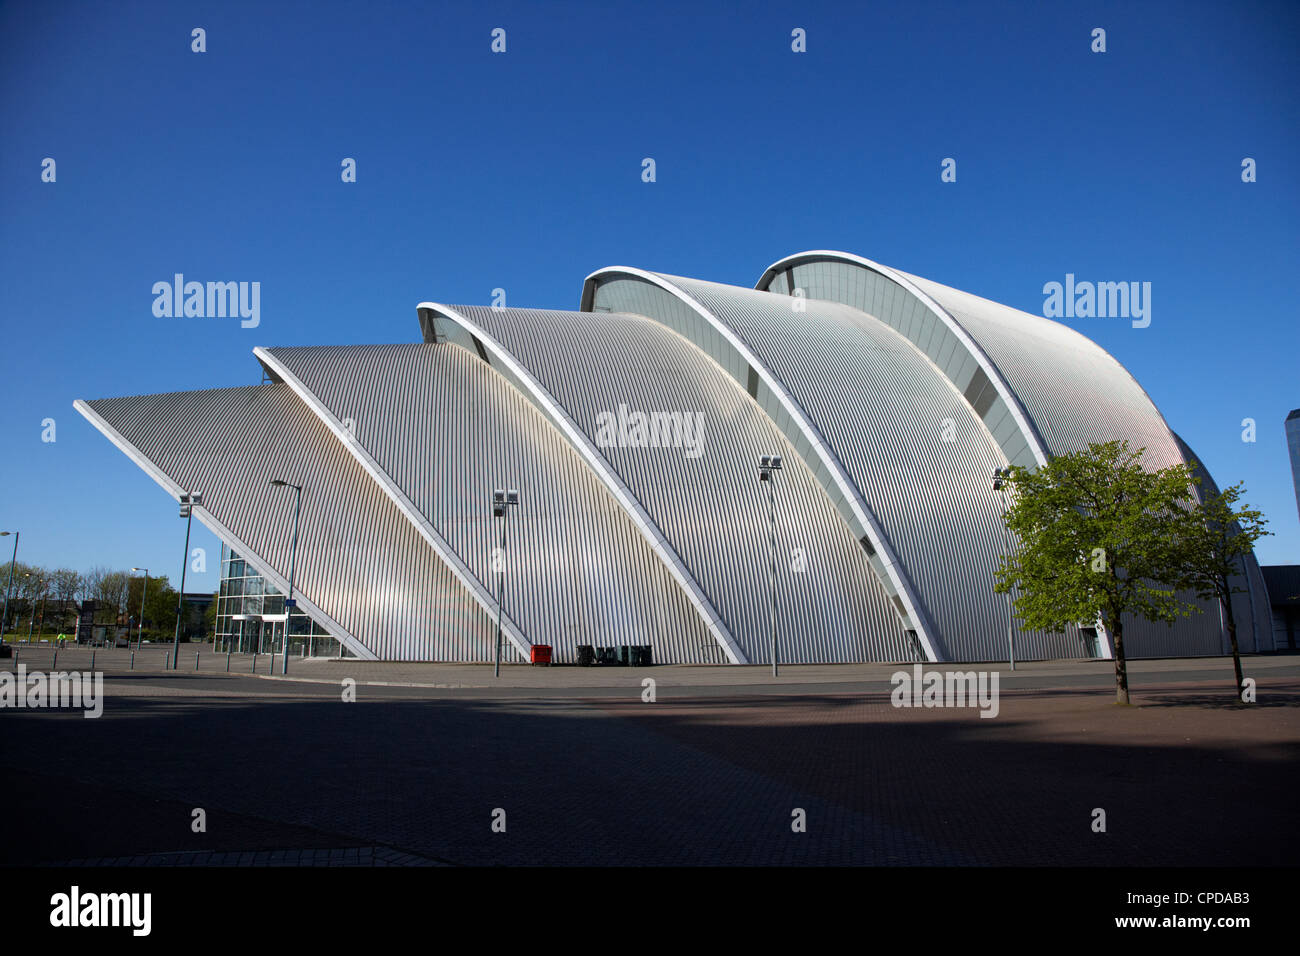 The Clyde Auditorium at the scottish exhibition and conference centre secc Glasgow Scotland UK Stock Photo